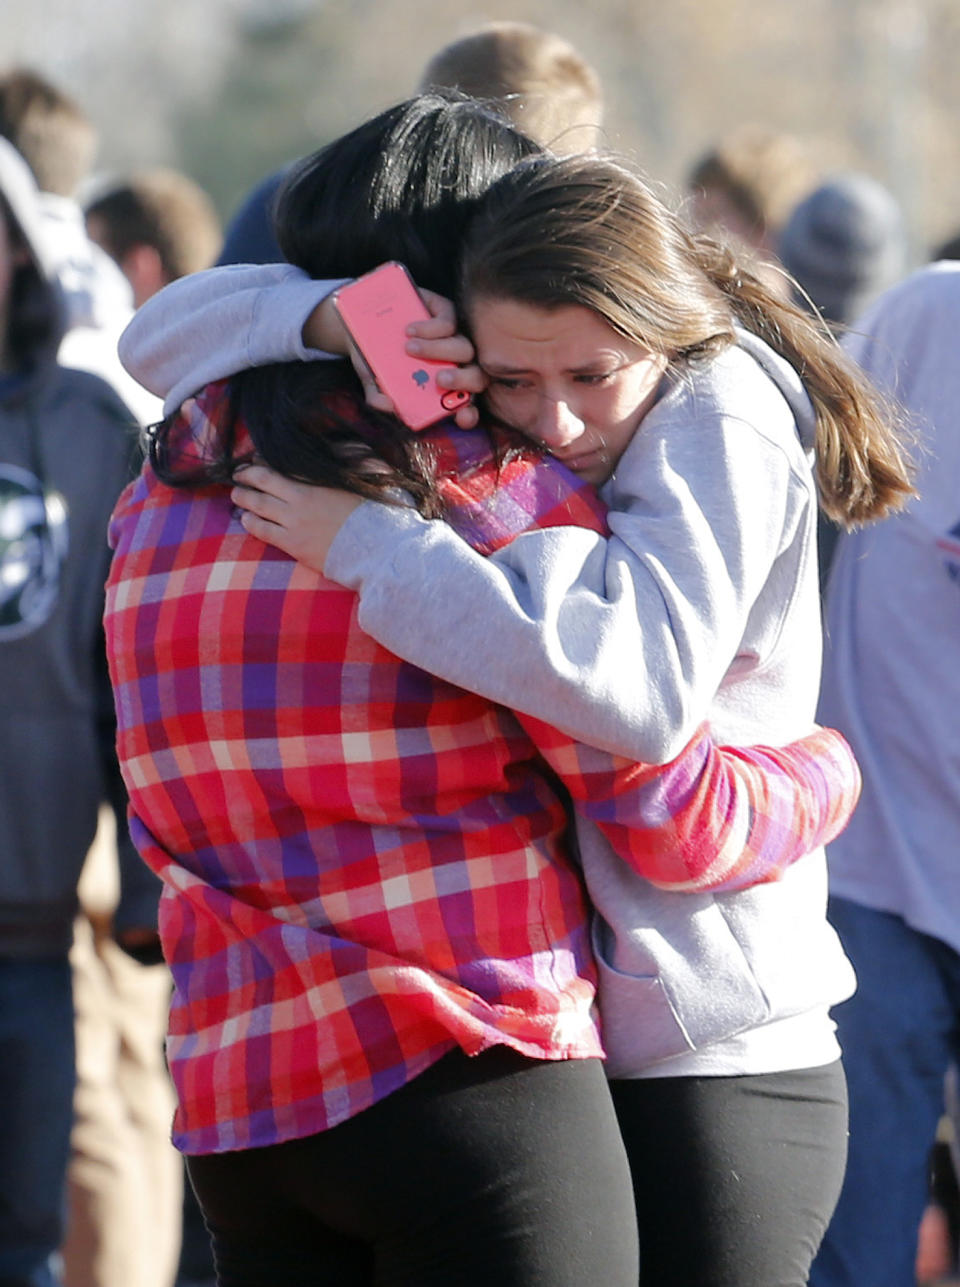 FILE - In this Dec. 13, 2013 file photo, students comfort each other outside of Arapahoe High School after a shooting on the campus in Centennial, Colo. Although still relatively rare, there’s been no real reduction in the number of school shootings since security was beefed up around the country with measures such as safety drills and the hiring of police officers, after the rampage at Connecticut's Sandy Hook Elementary School in December 2012. (AP Photo/Ed Andrieski)